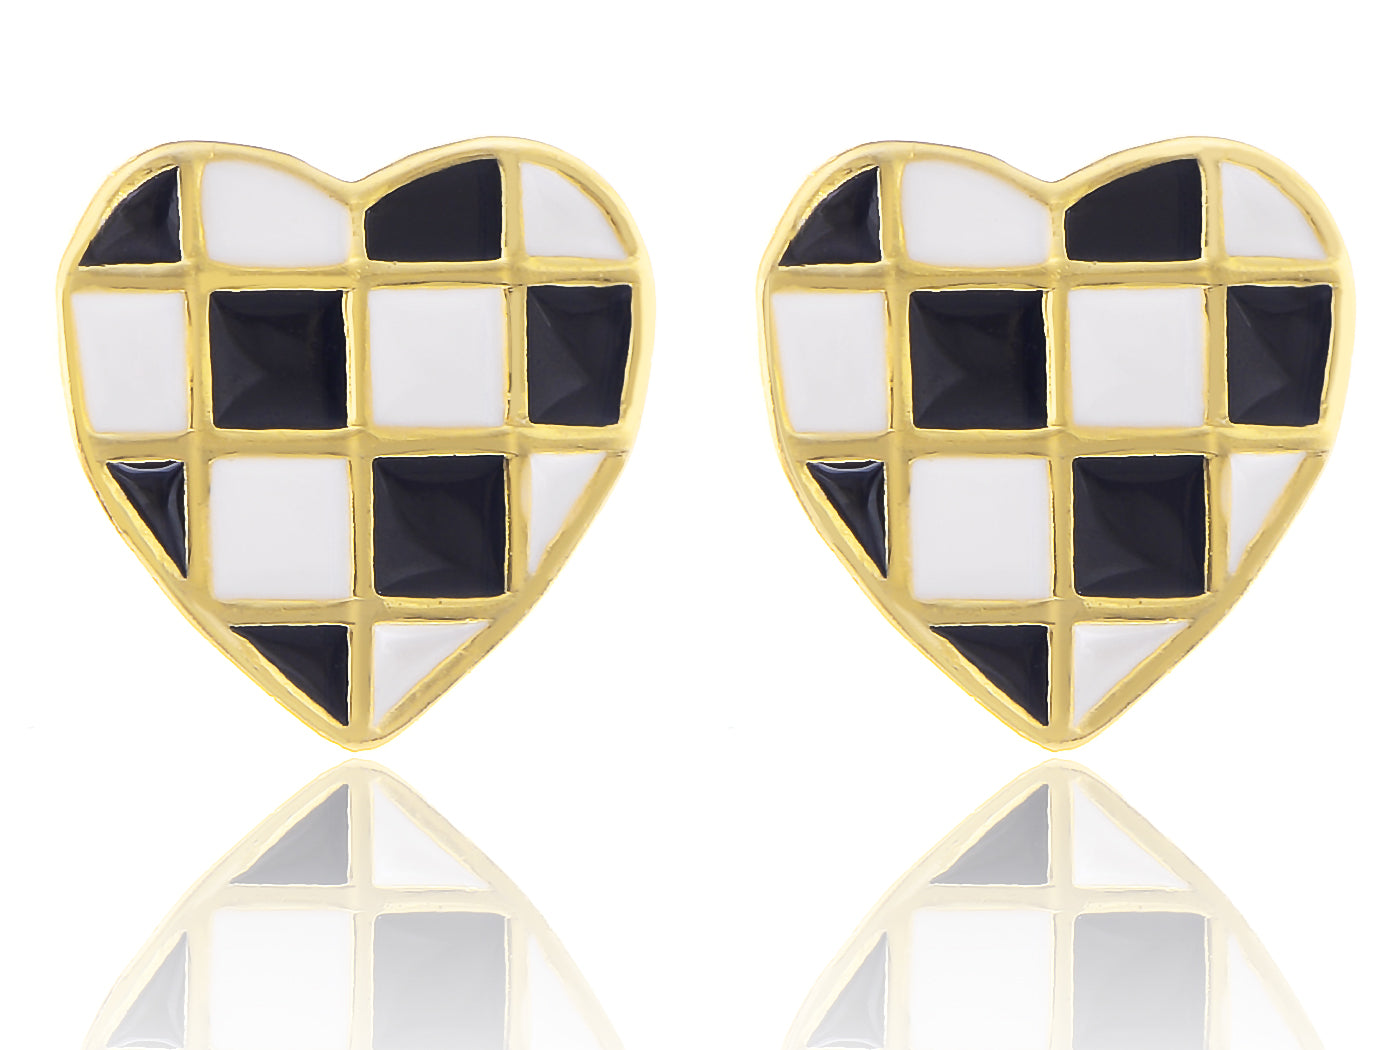 Alilang Black and White Checkerboard Stud Earrings Love Heart Earrings for Women 925 Silver Needle Geometric Peach Heart Stud Earrings Fashion Jewelry Gifts, Gold